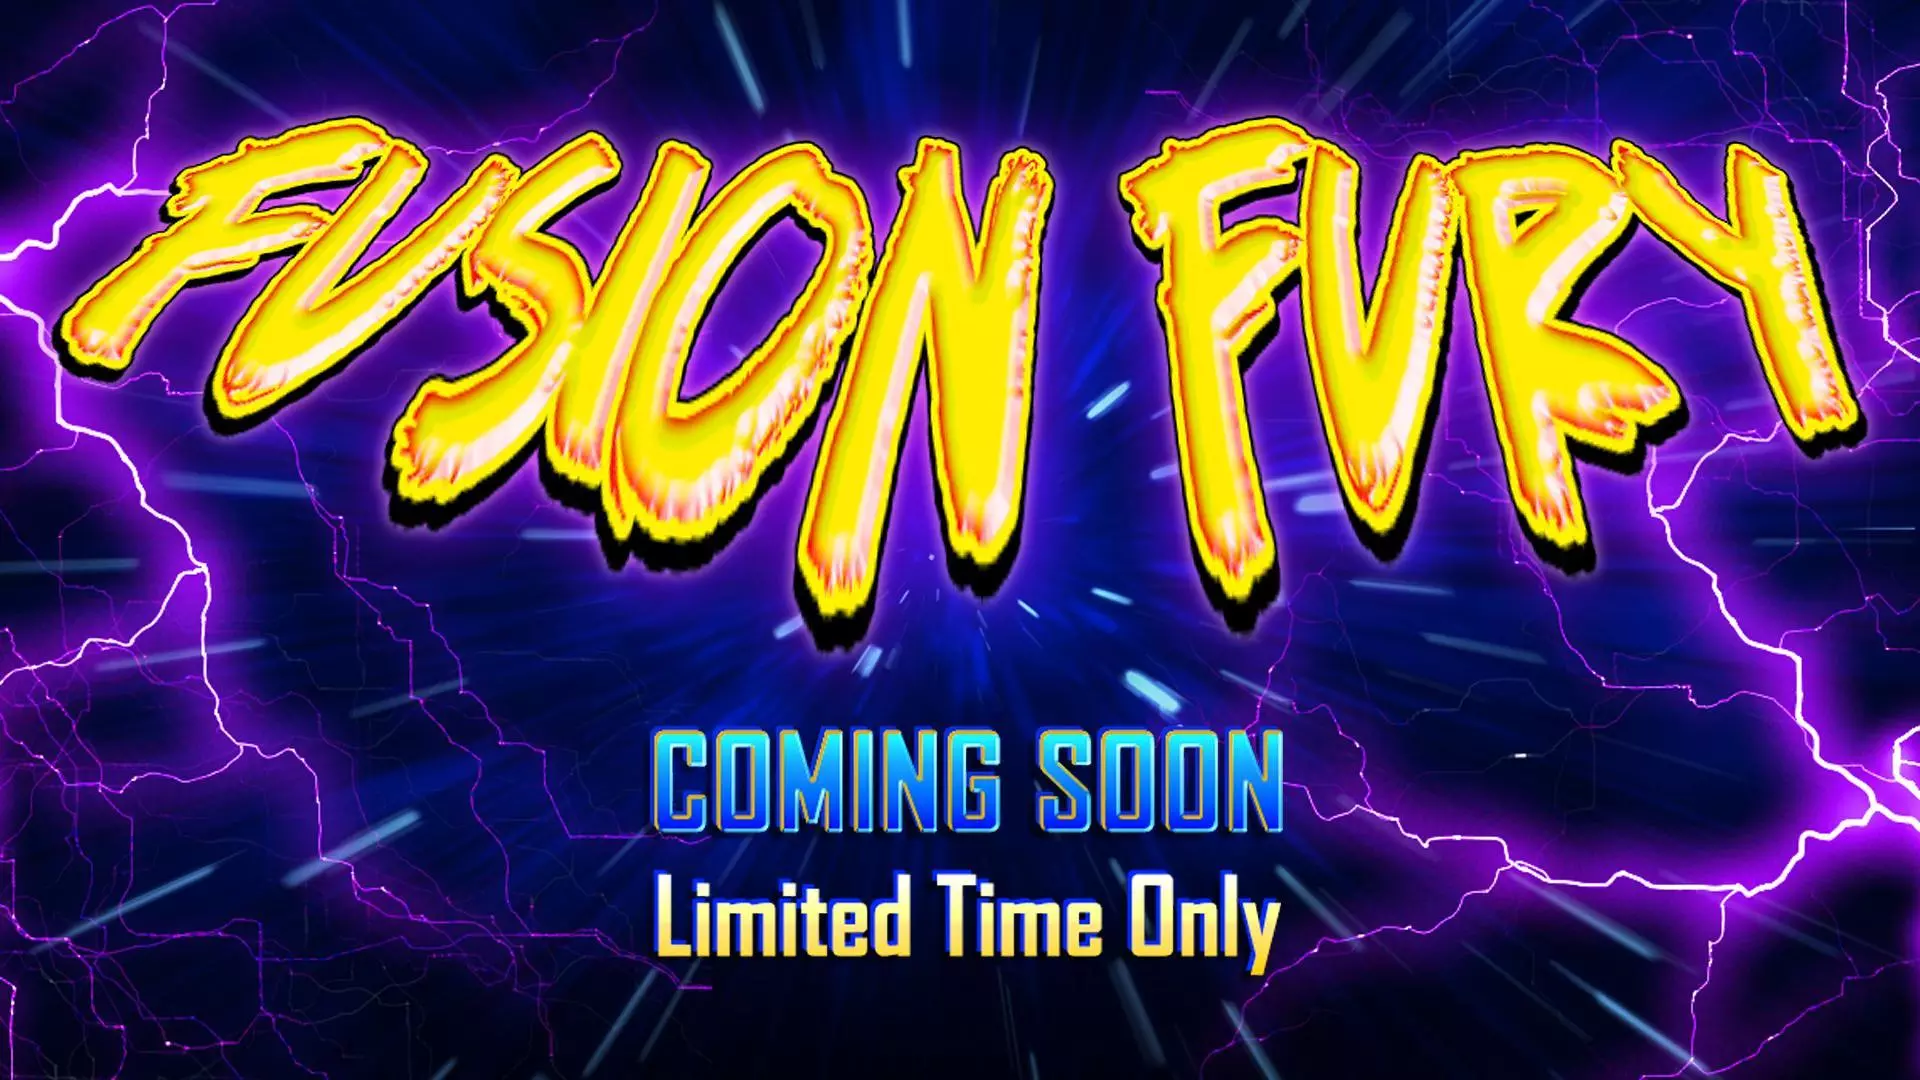 WWE SuperCard receives new Fusion Fury and Valentine's Day Cards